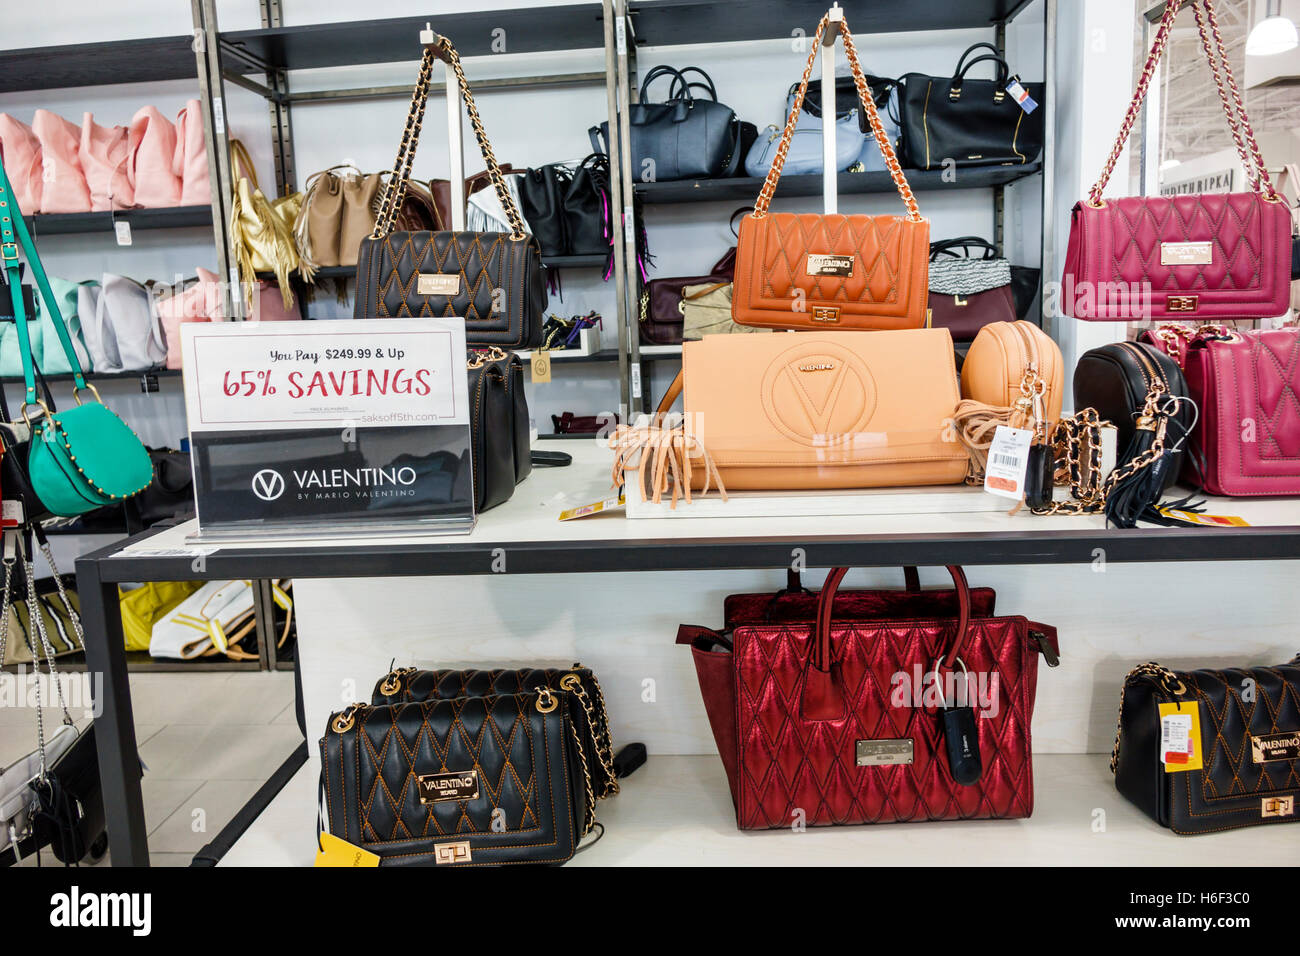 Palm Beach Florida Outlets shopping Saks Fifth Avenue Off 5th inside Stock Photo: 124492480 - Alamy